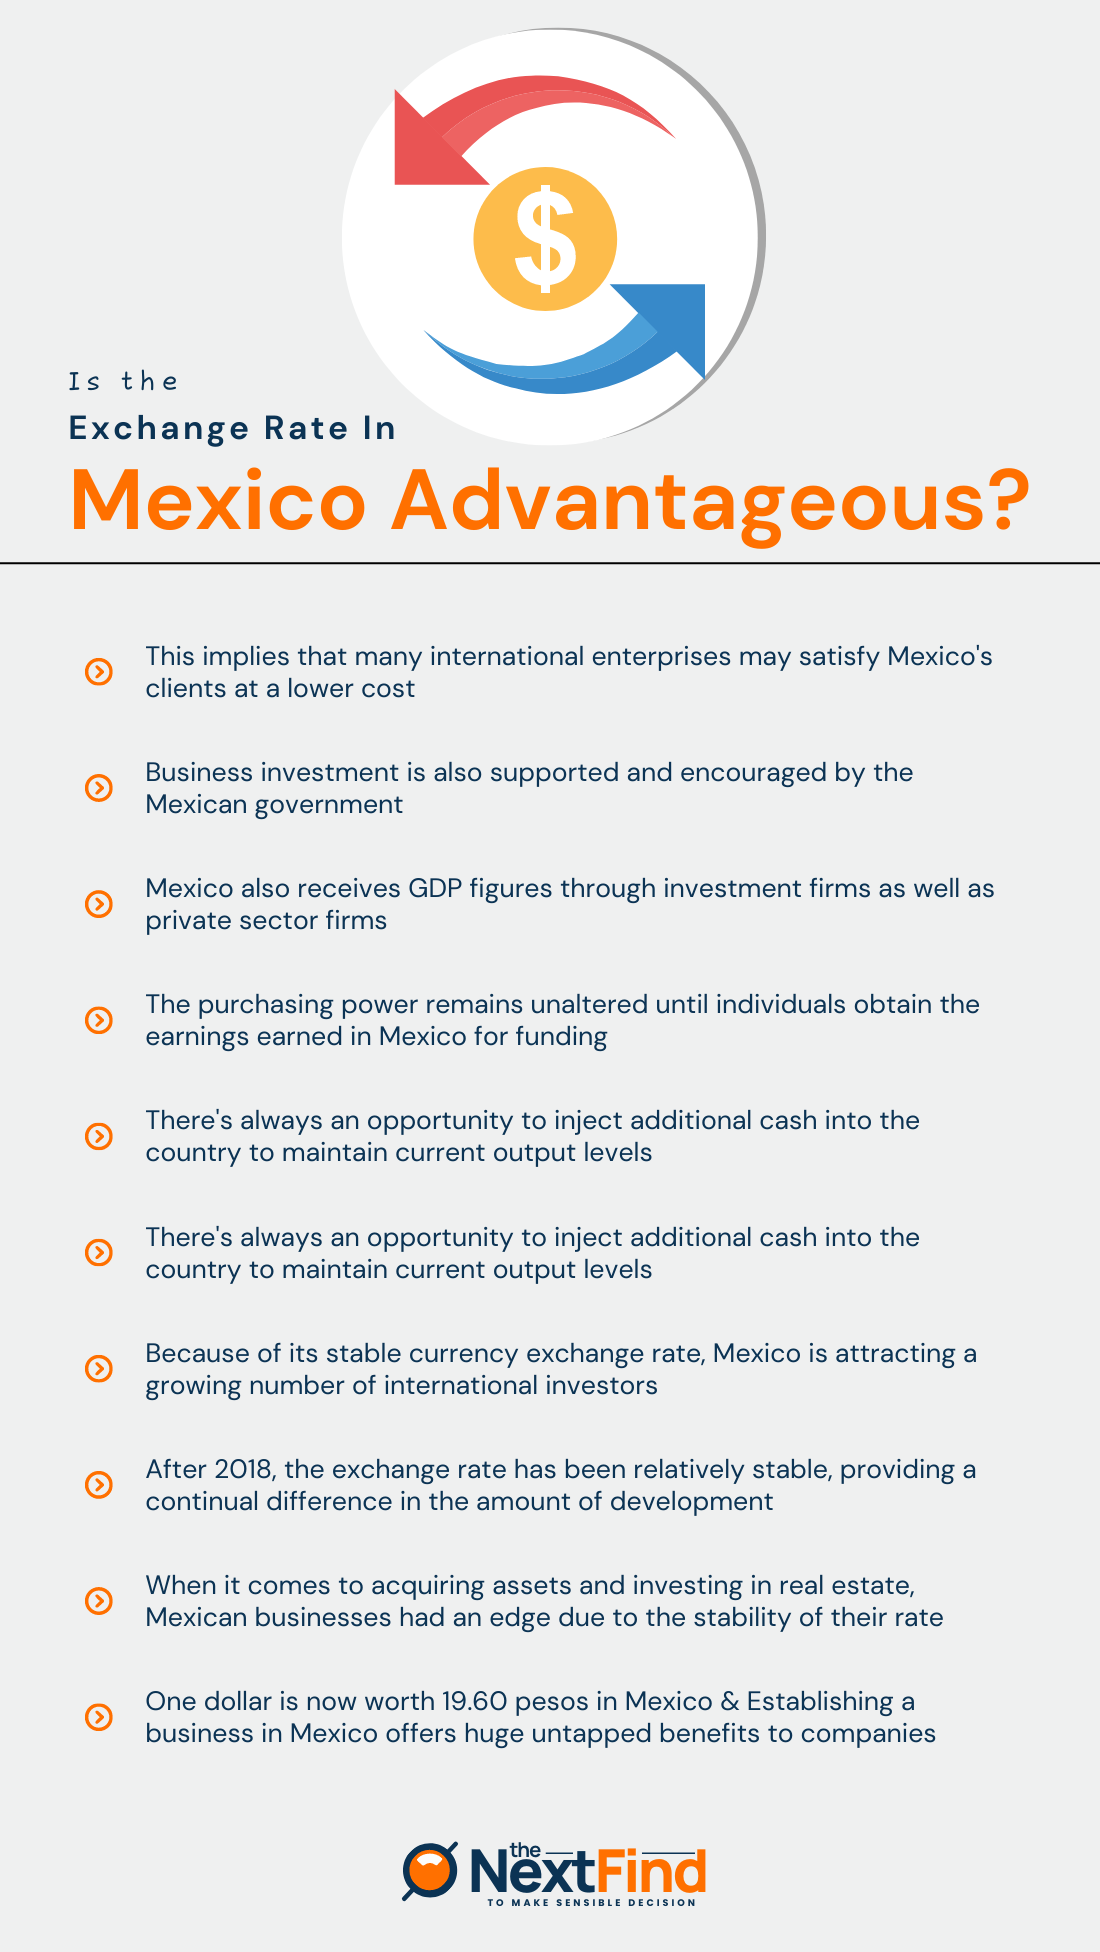 Is the Exchange Rate in Mexico Advantageous